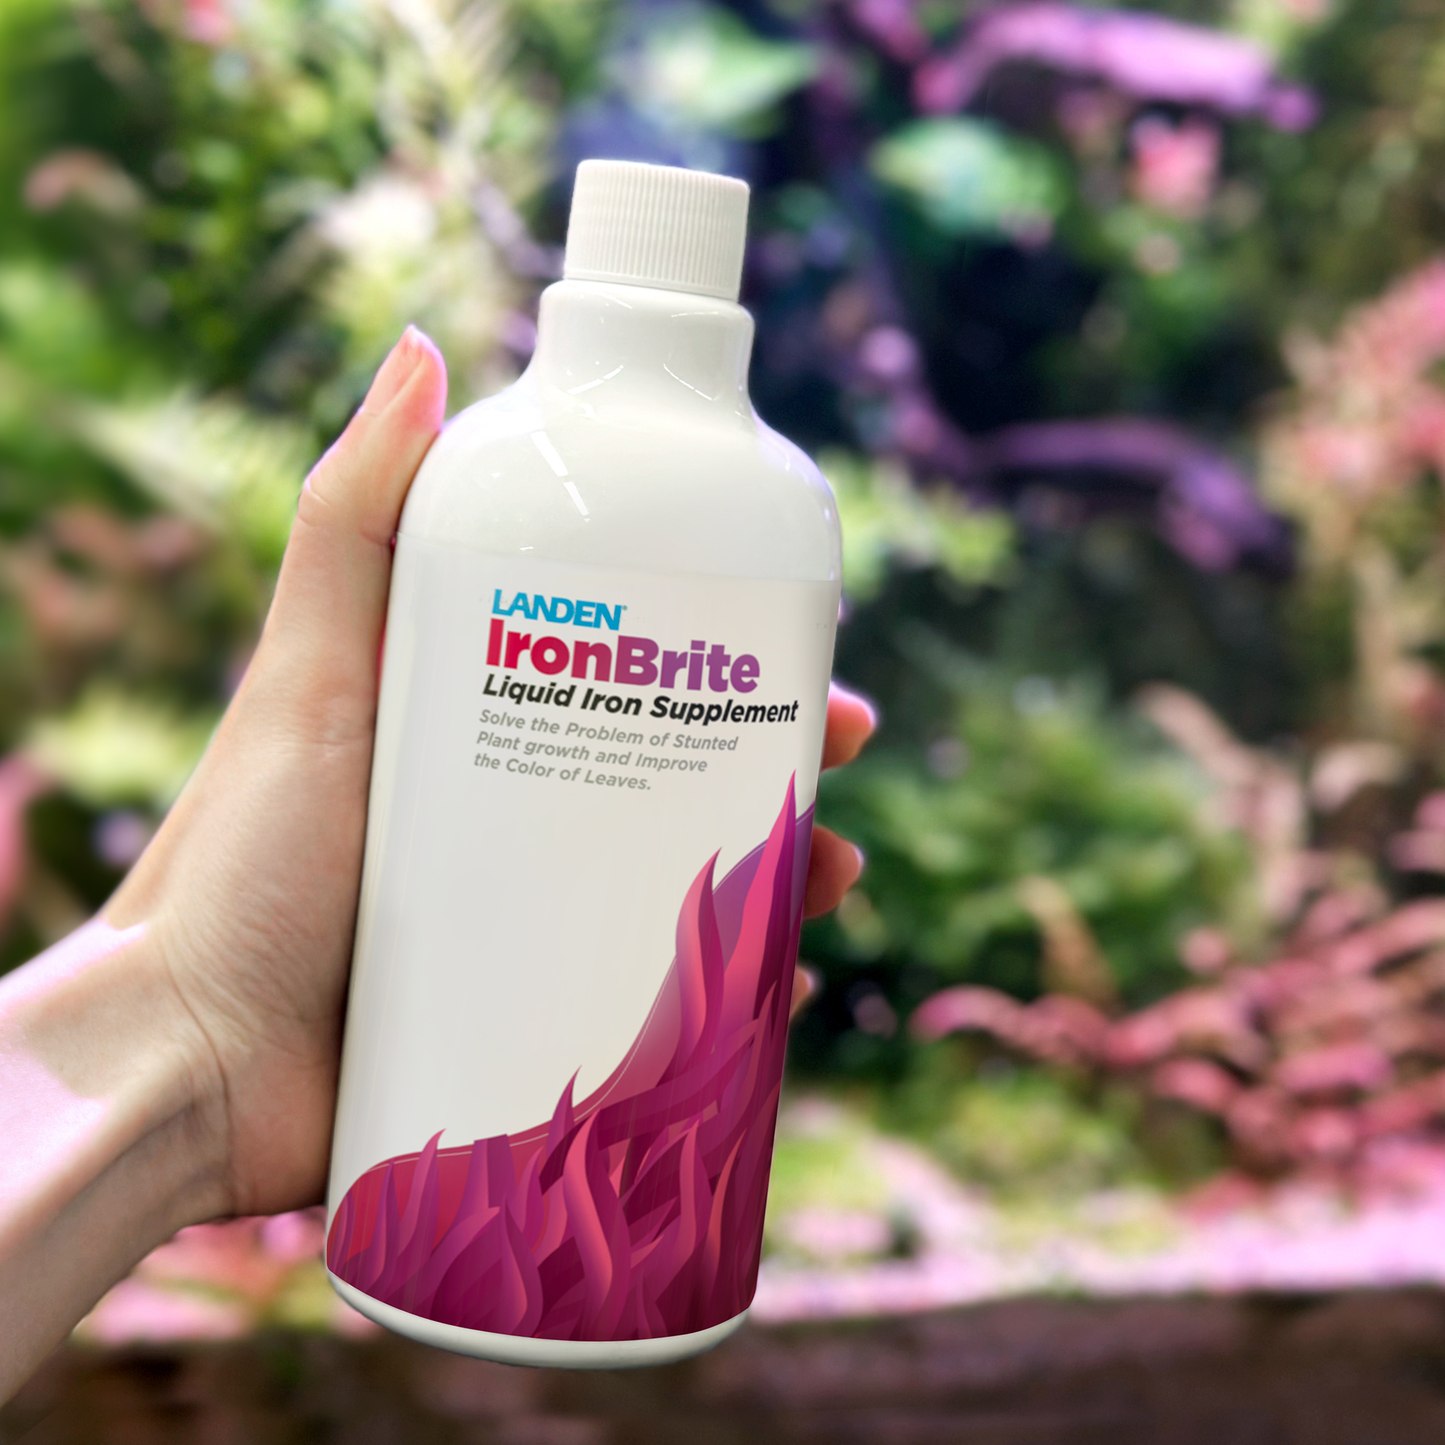 LANDEN IronBrite Liquid Iron Supplement Solves The Problem of Stunted Plant Growth and Improves The Color of Leaves